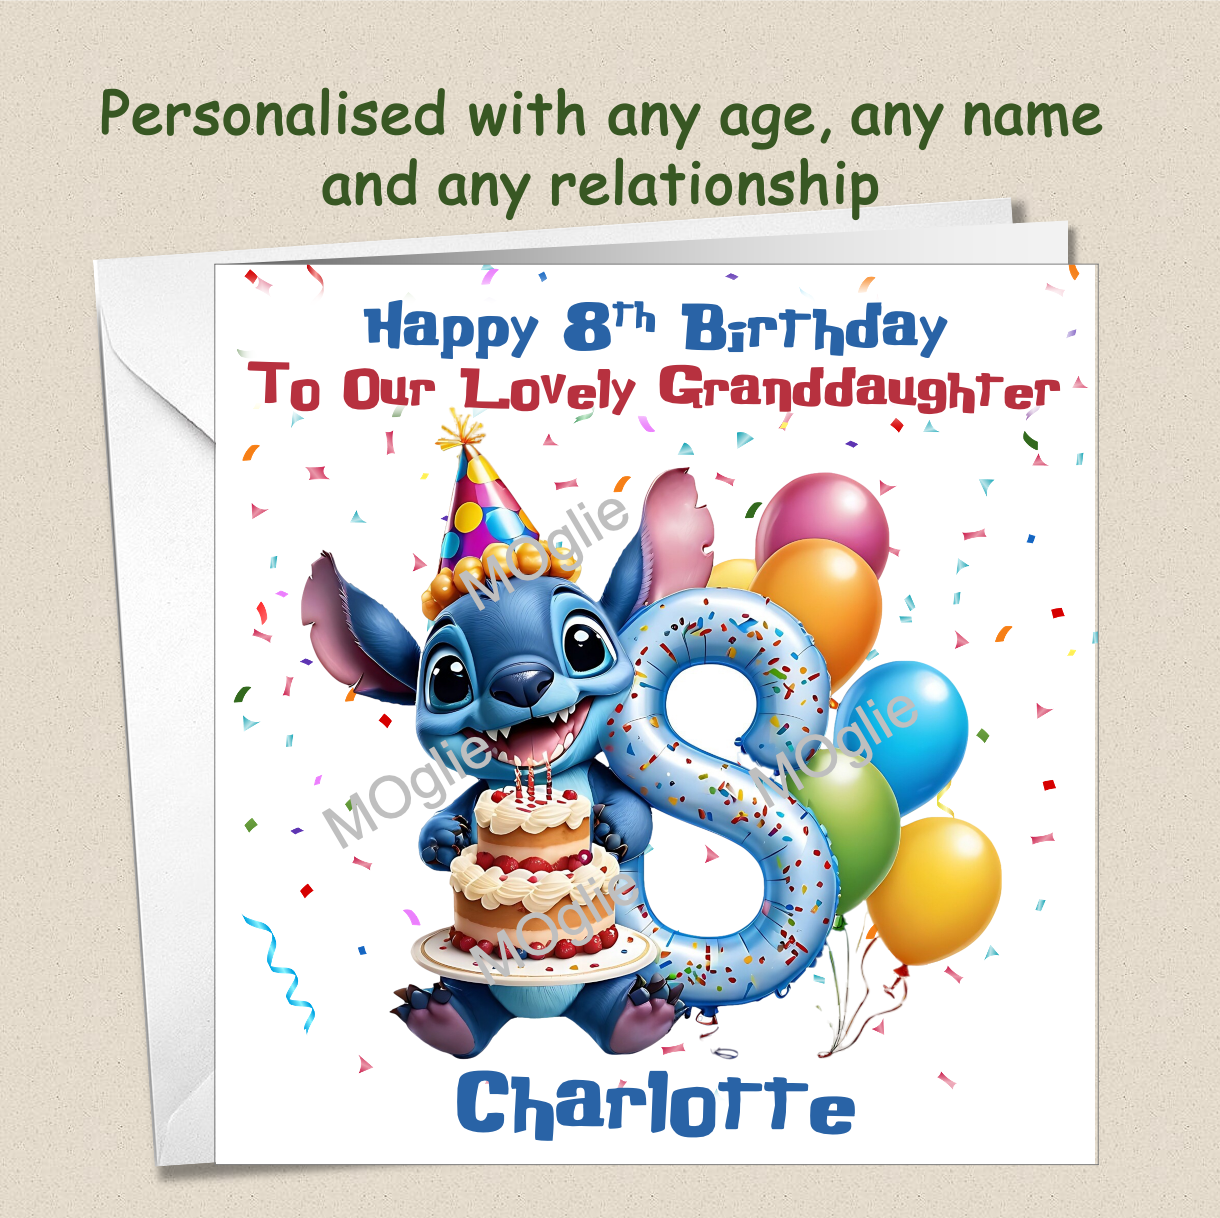 Personalised Lilo and Stitch 8th Birthday Cards with name and relationship